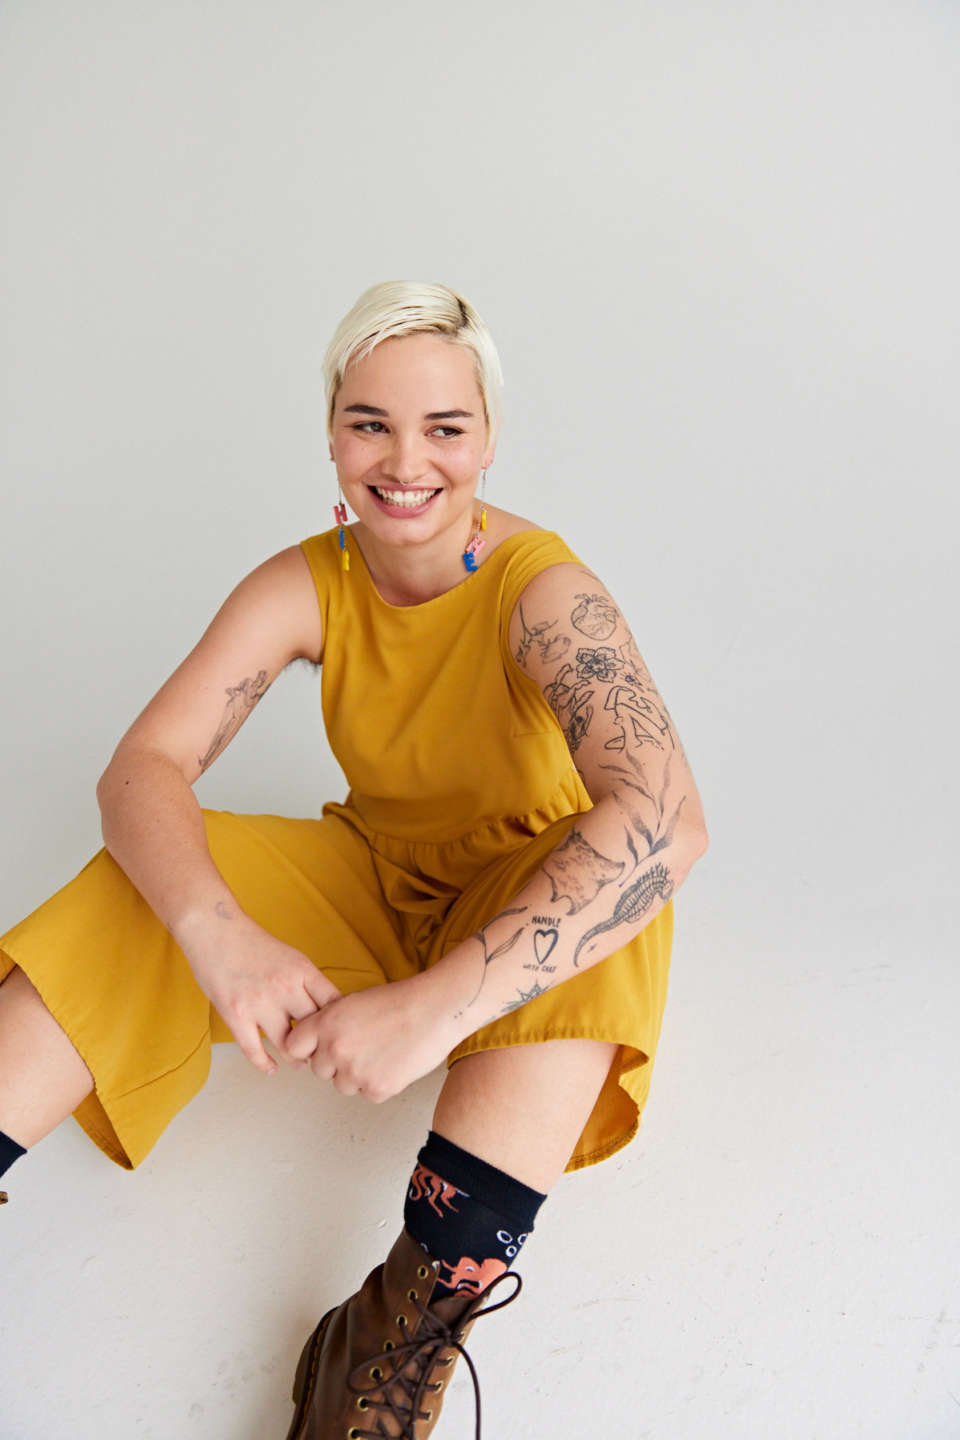 Becki wears a yellow jumpsuit and has tattoos. shes smiling